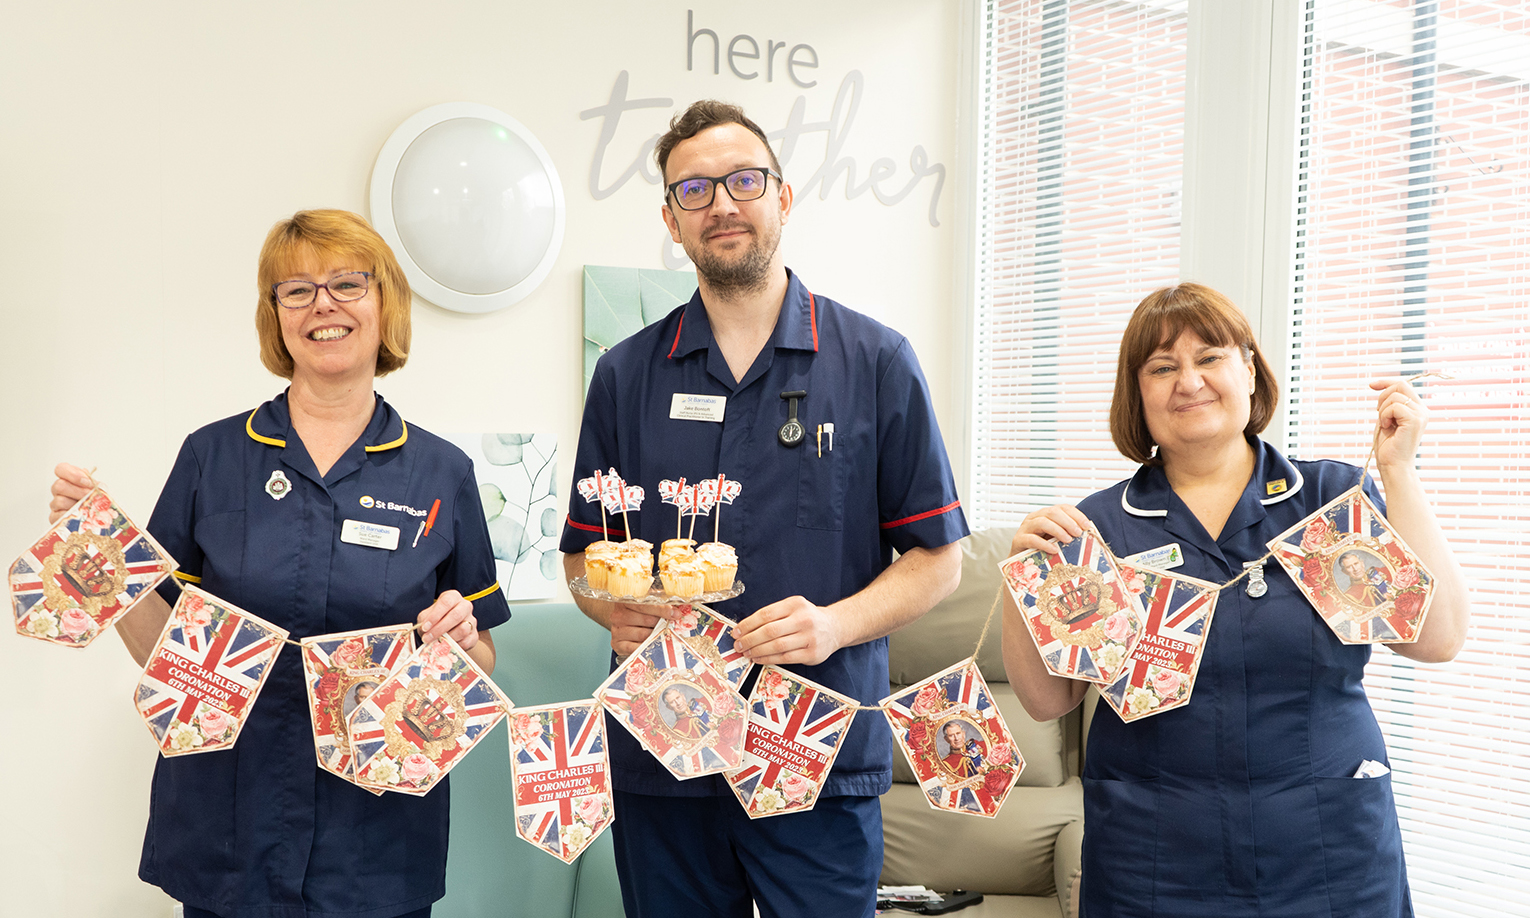 Two women and a man wearing dark blue medical scrubs, holding Coronation-themed bunting in red, blue and white. The man is also holding a tray of cupcakes.